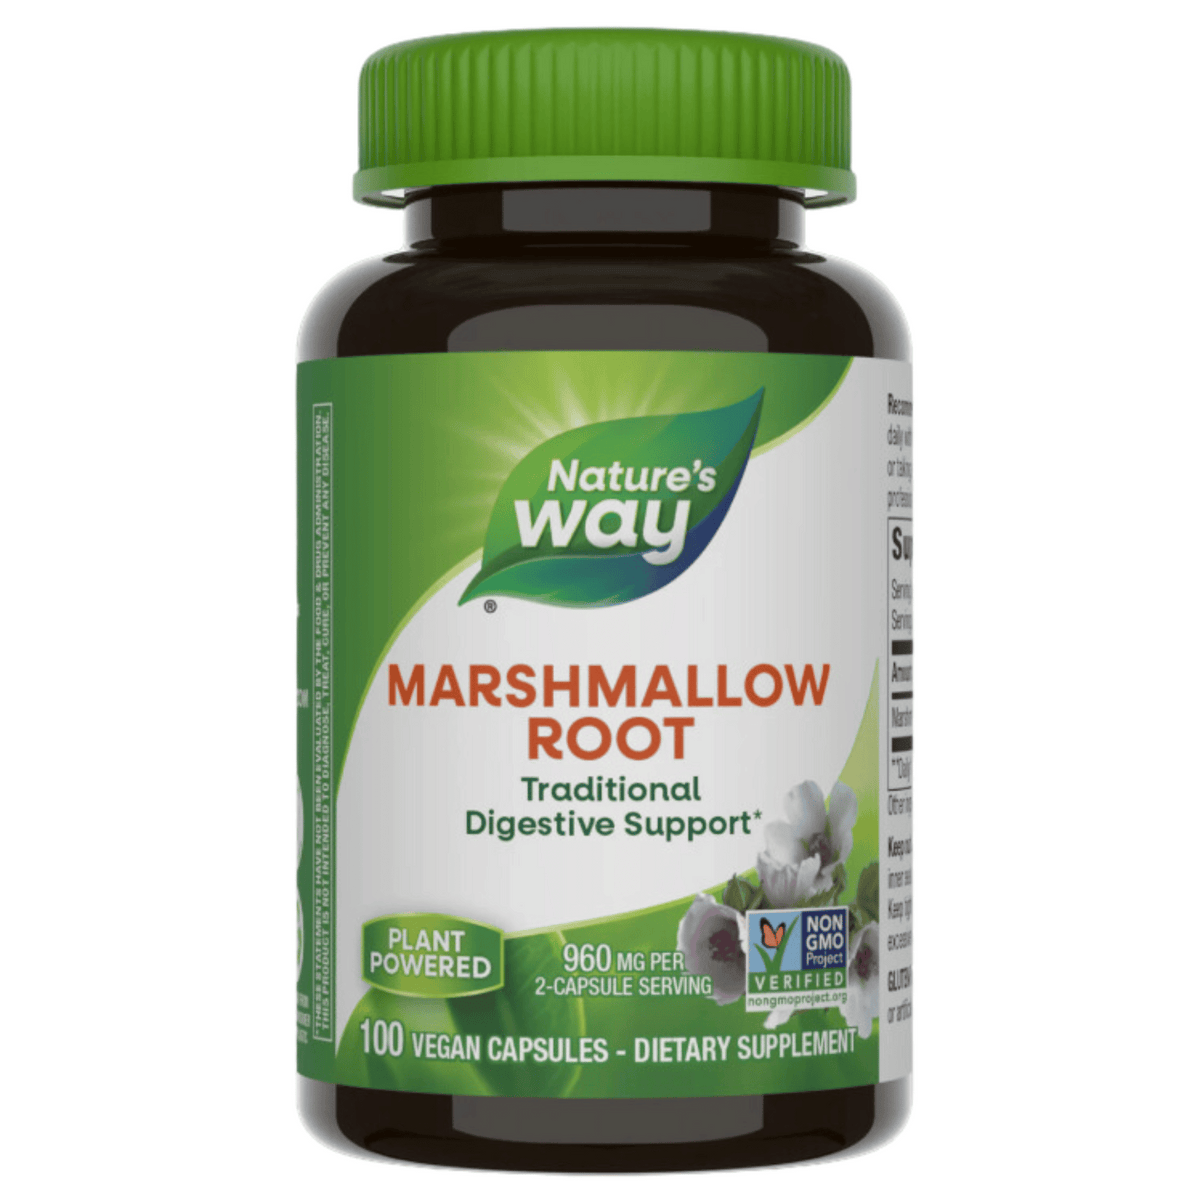 Primary Image of Marshmallow Root